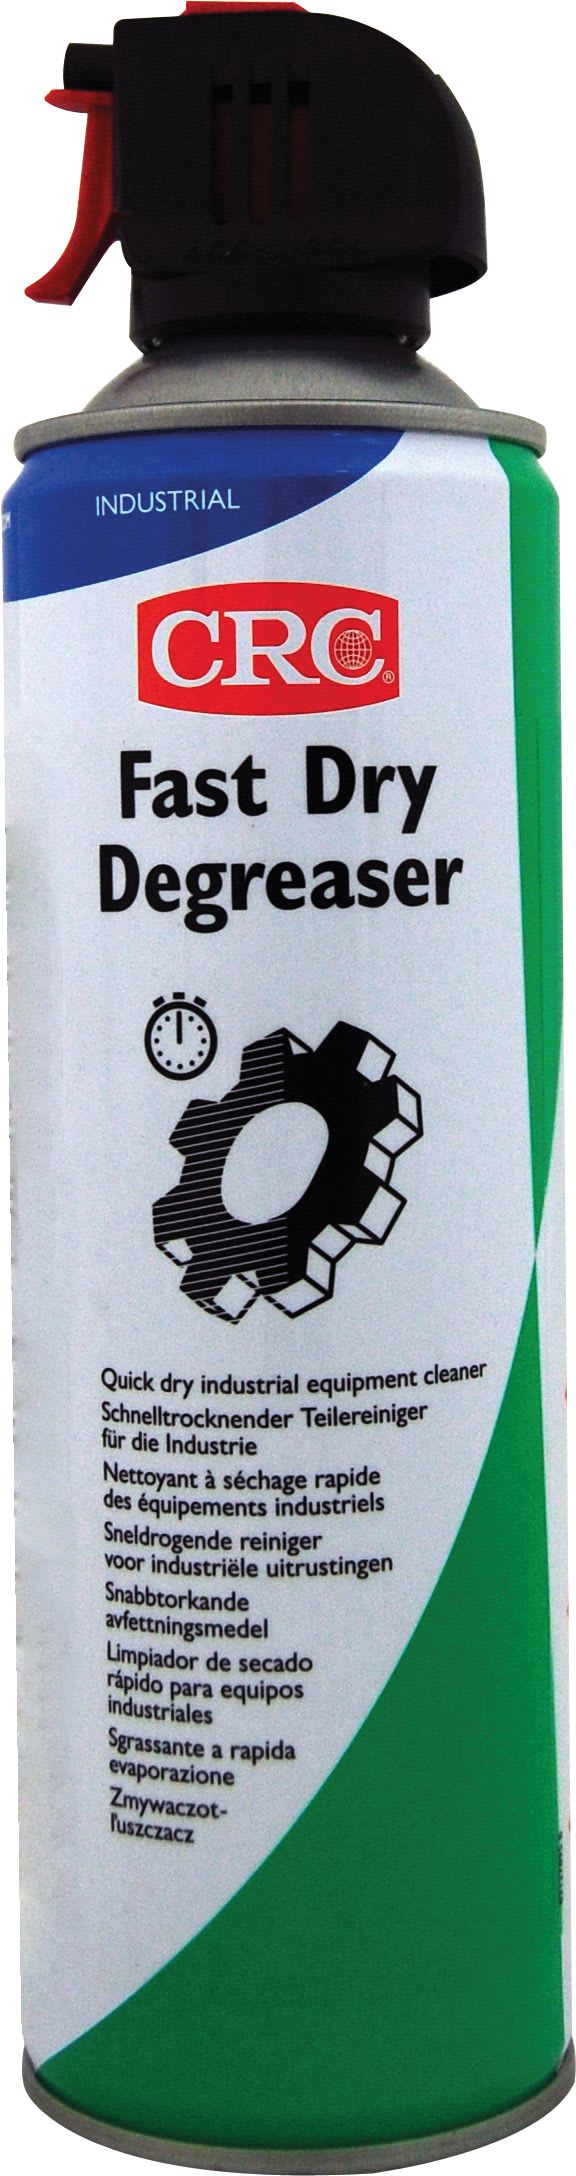 Kf - FAST DRY DEGREASER 5 L